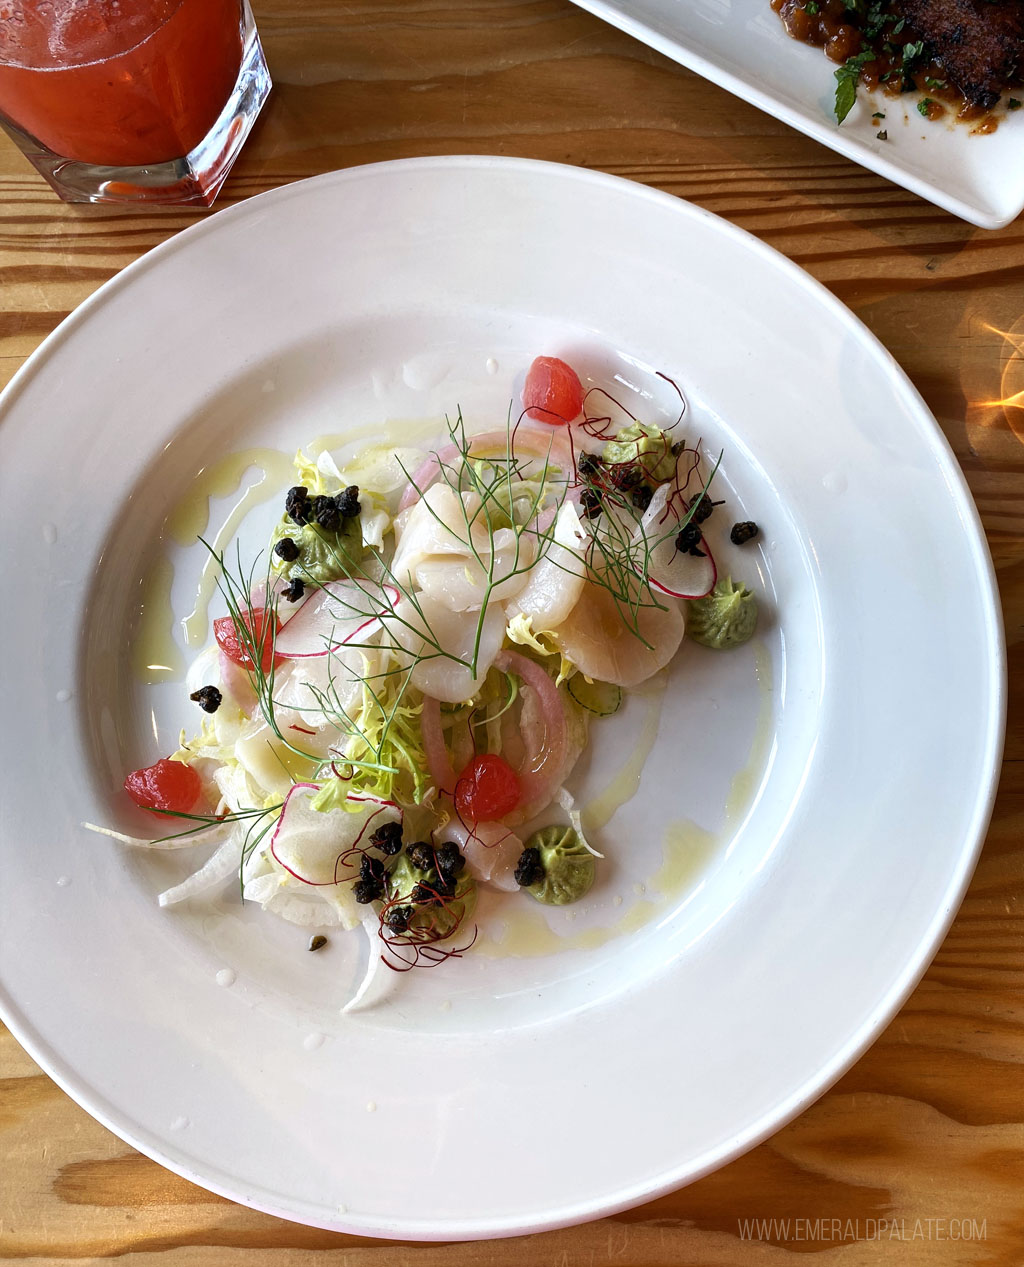 scallop crudo from one of the best Whistler BC restaurants